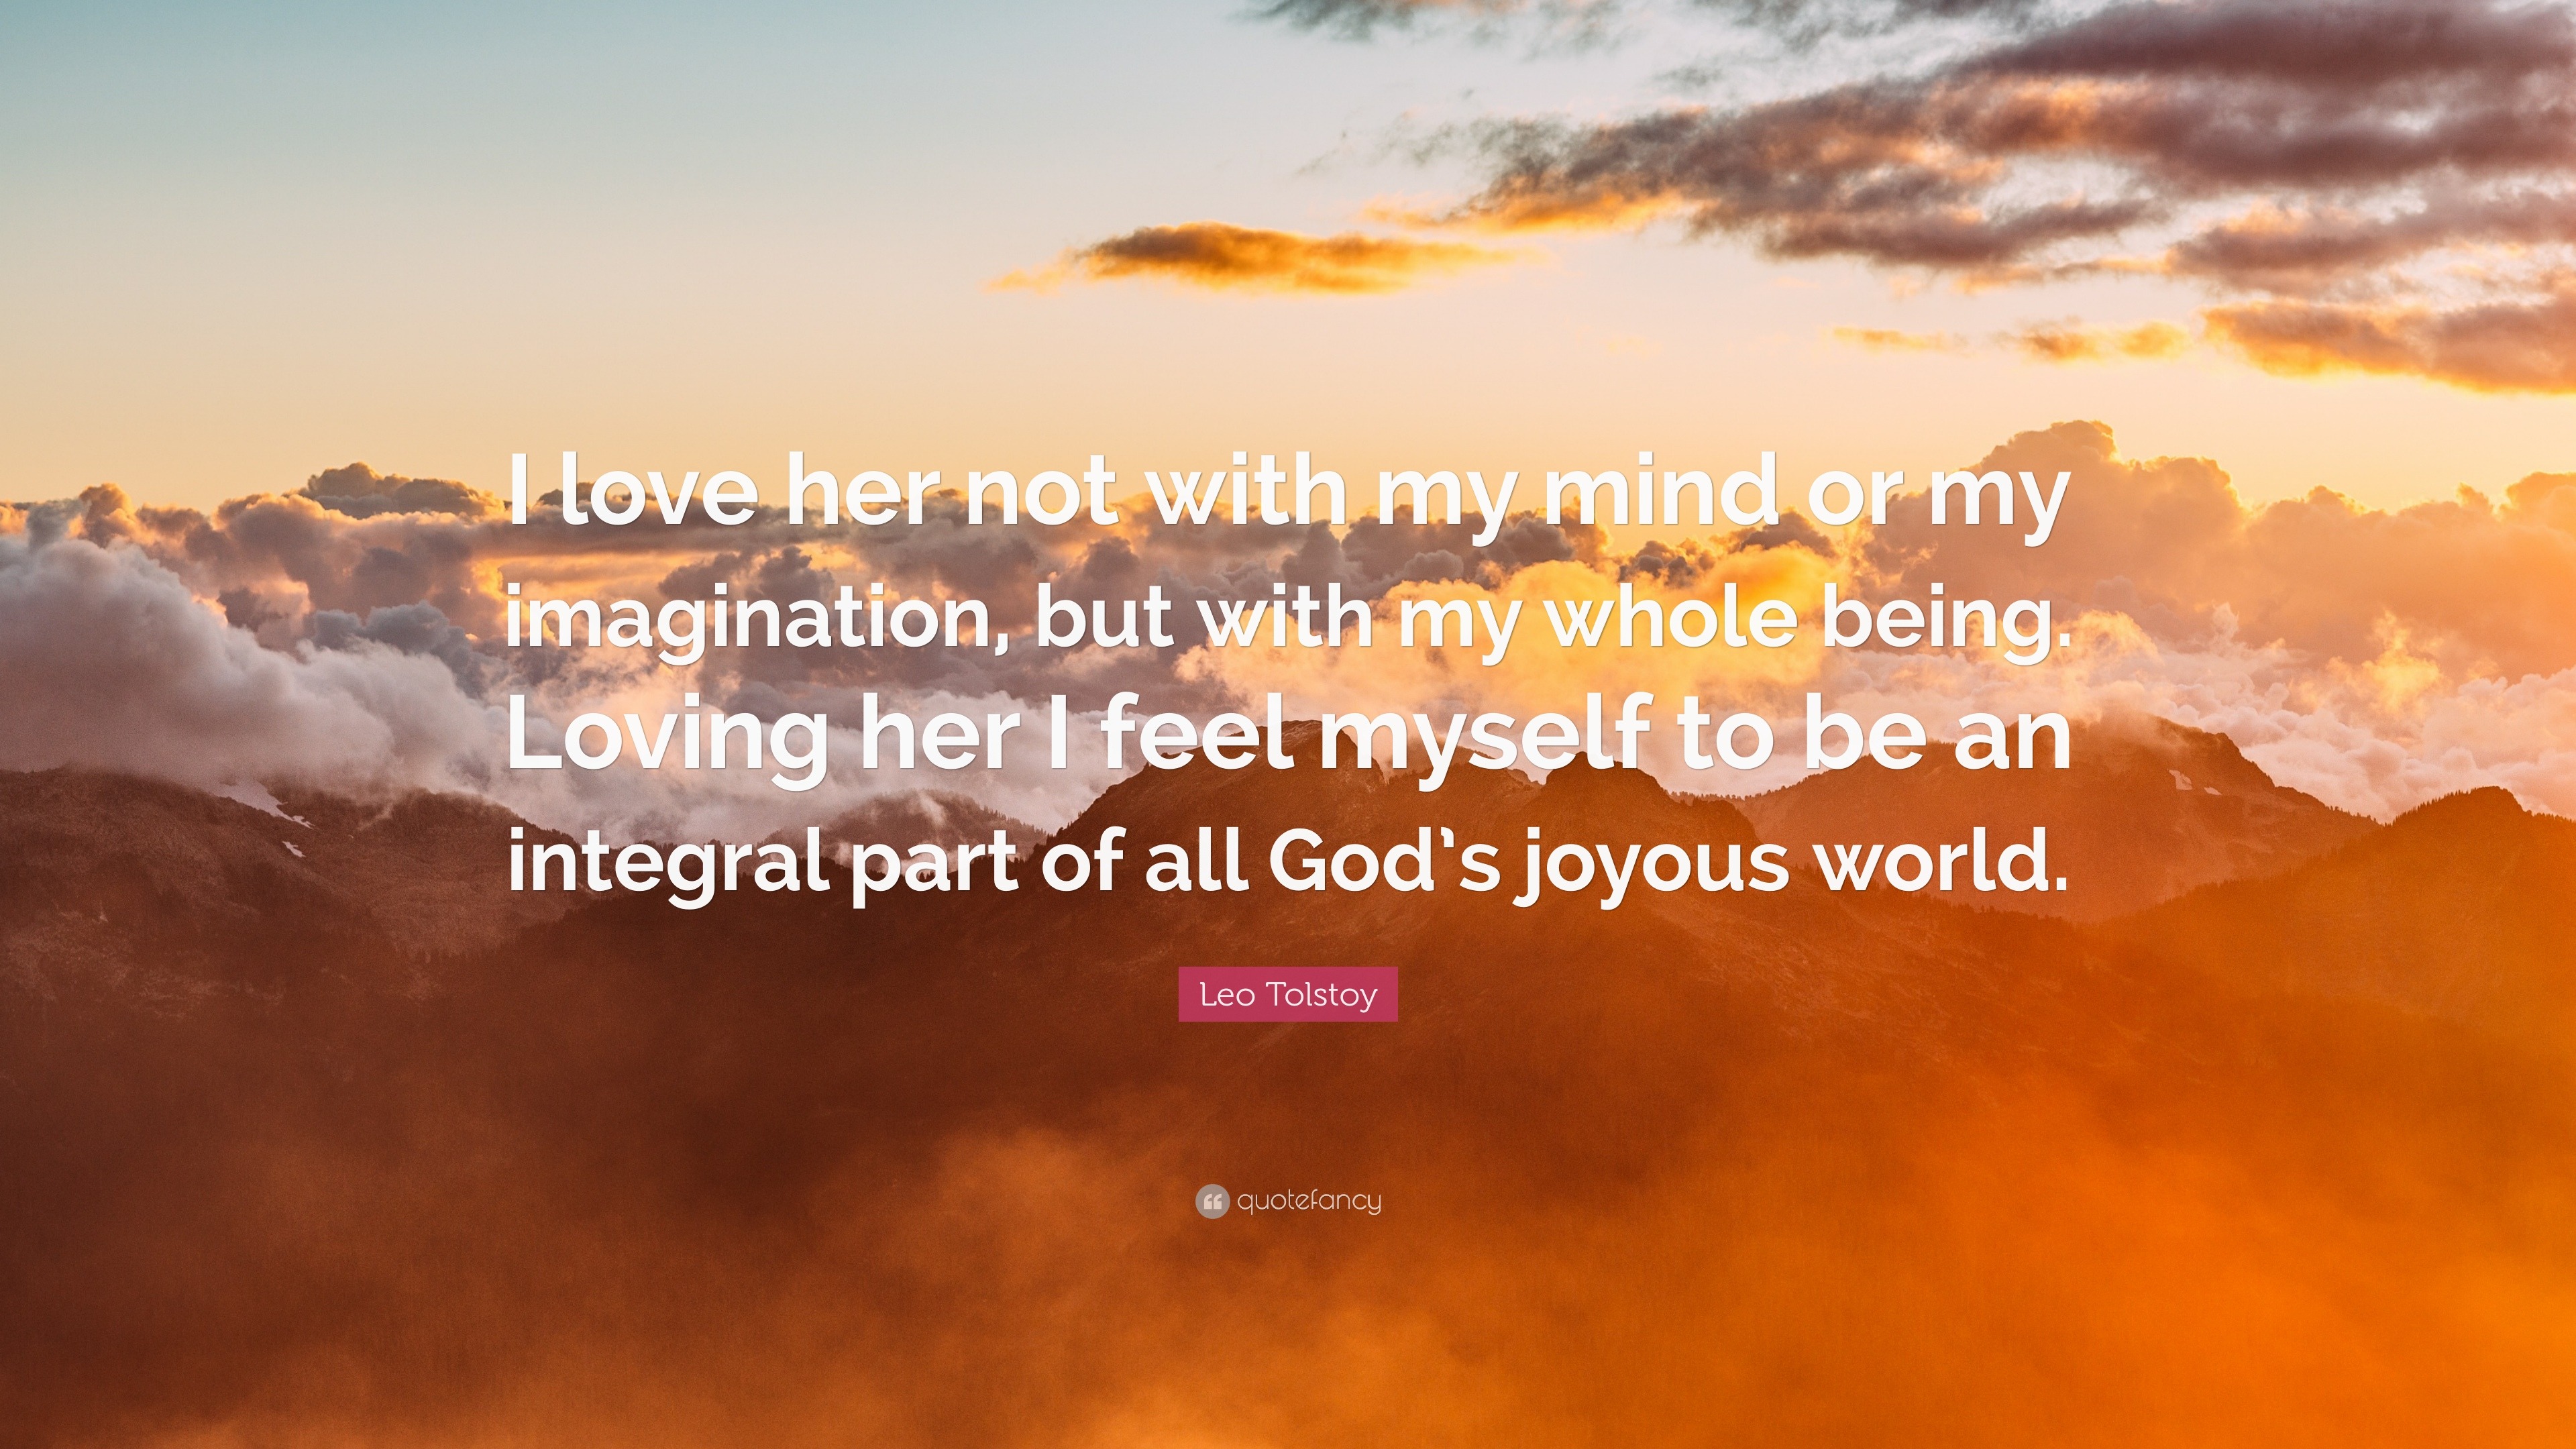 Leo Tolstoy Quote I Love Her Not With My Mind Or My Imagination But With My Whole Being Loving Her I Feel Myself To Be An Integral Part